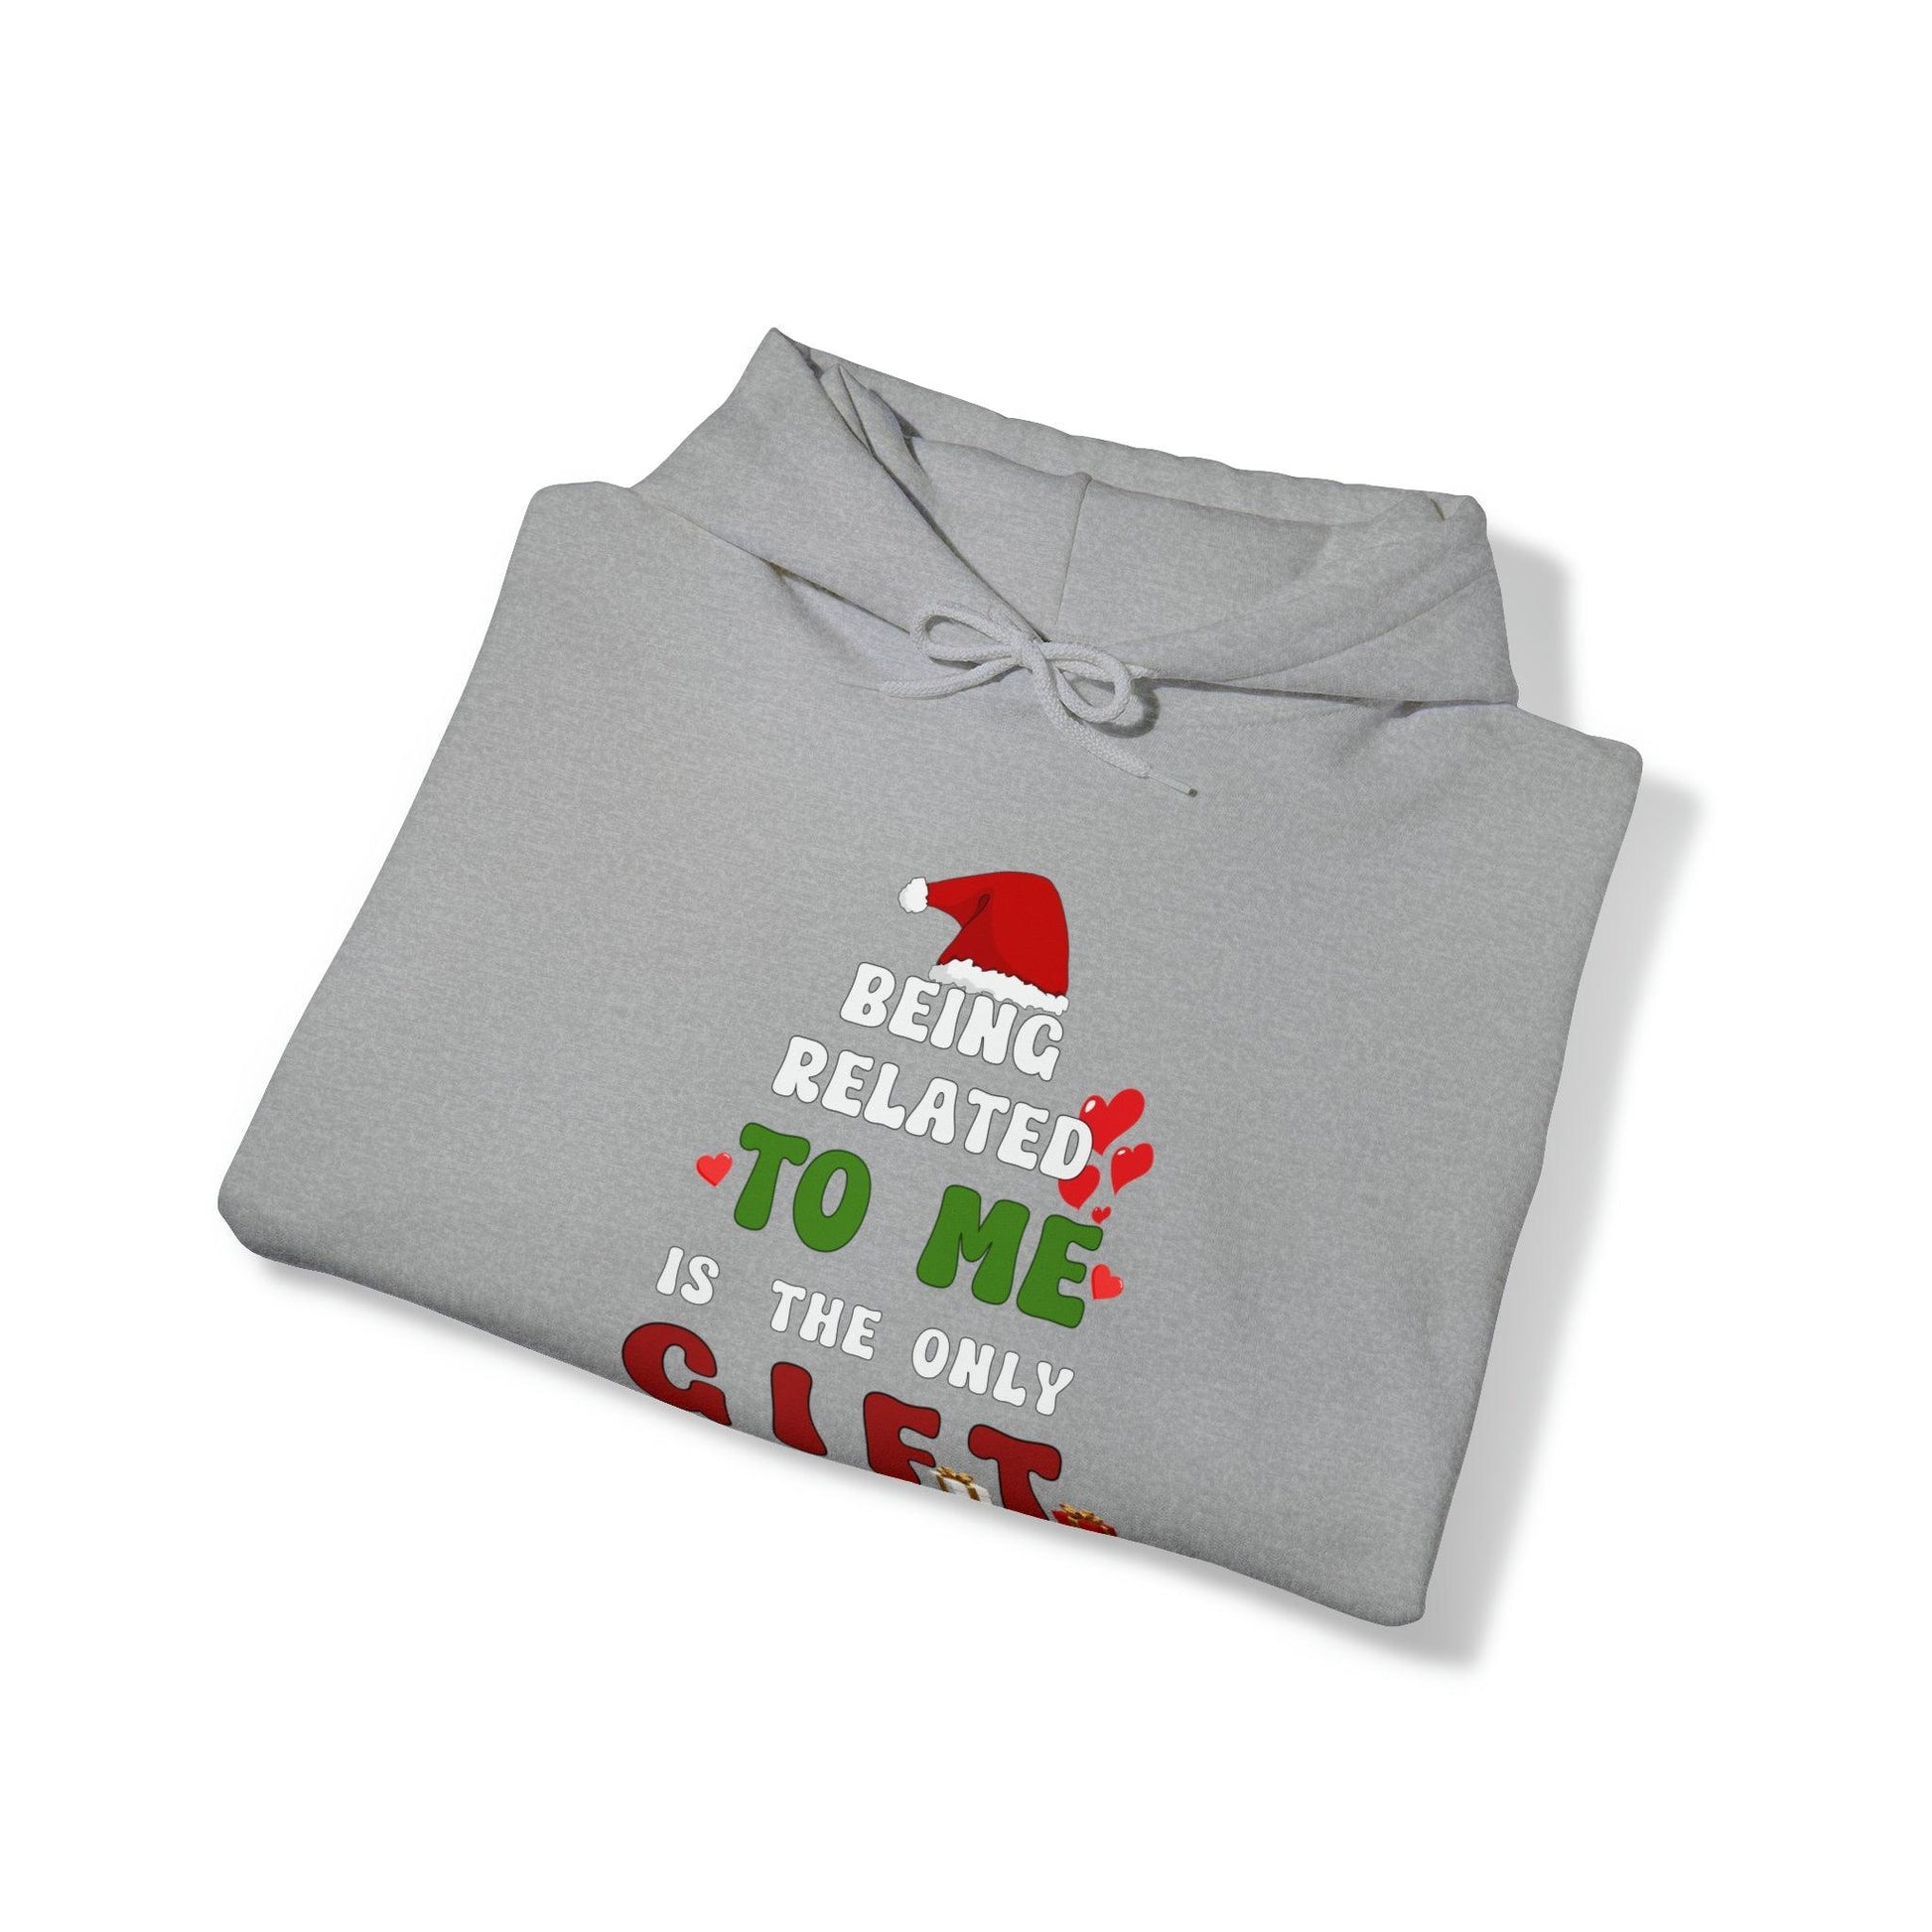 Christmas Vibe Hooded Sweatshirt Funny Christmas Trendy Shirt Funny Christmas Long Sleeve Tee Being Related To Me Is The Only Gift You Need Shirt Matching Shirts Christmas Gift Holiday Shirt Cute Christmas Sweatshirt Family Sweatshirt - Giftsmojo